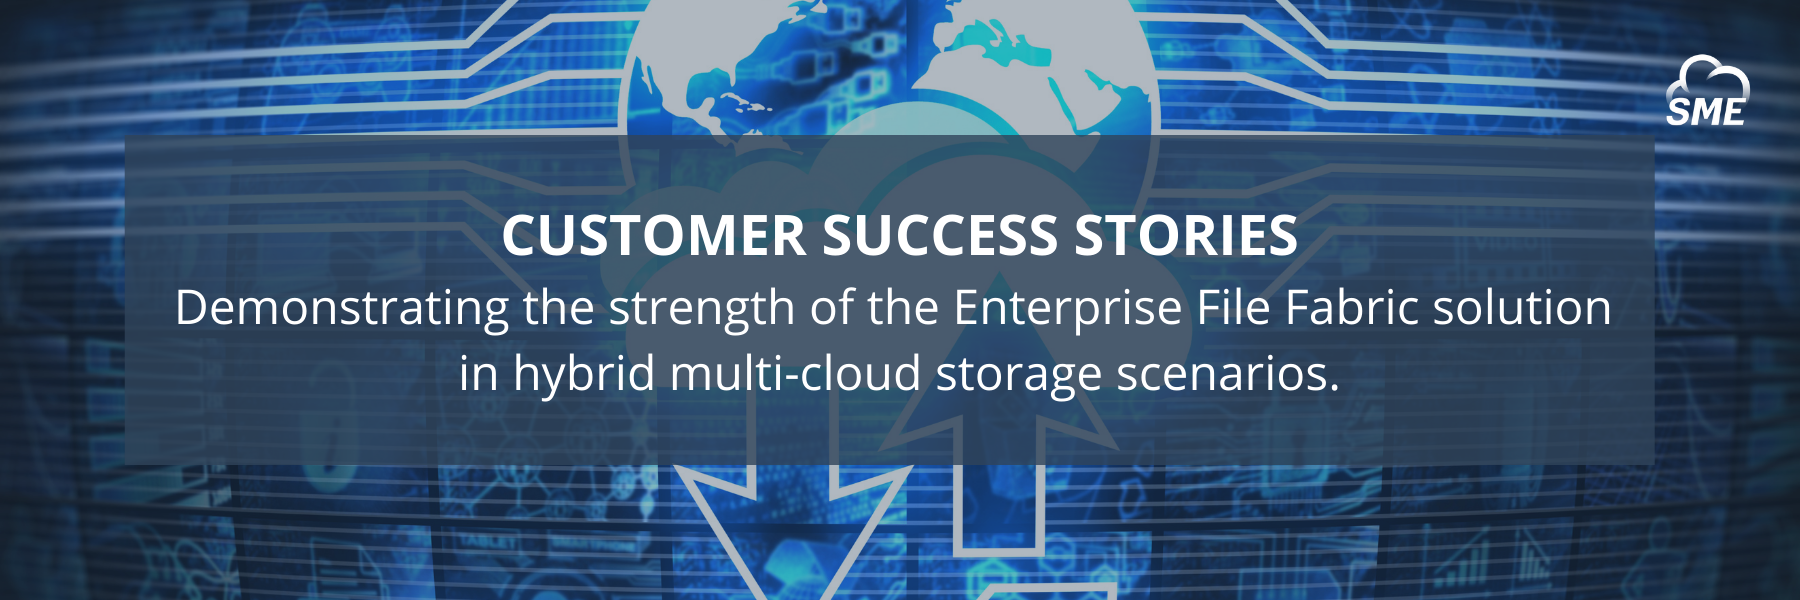 Storage Made Easy Releases a Number of Multi-Cloud Customer Case Studies for the Finance, M&E and Manufacturing Verticals